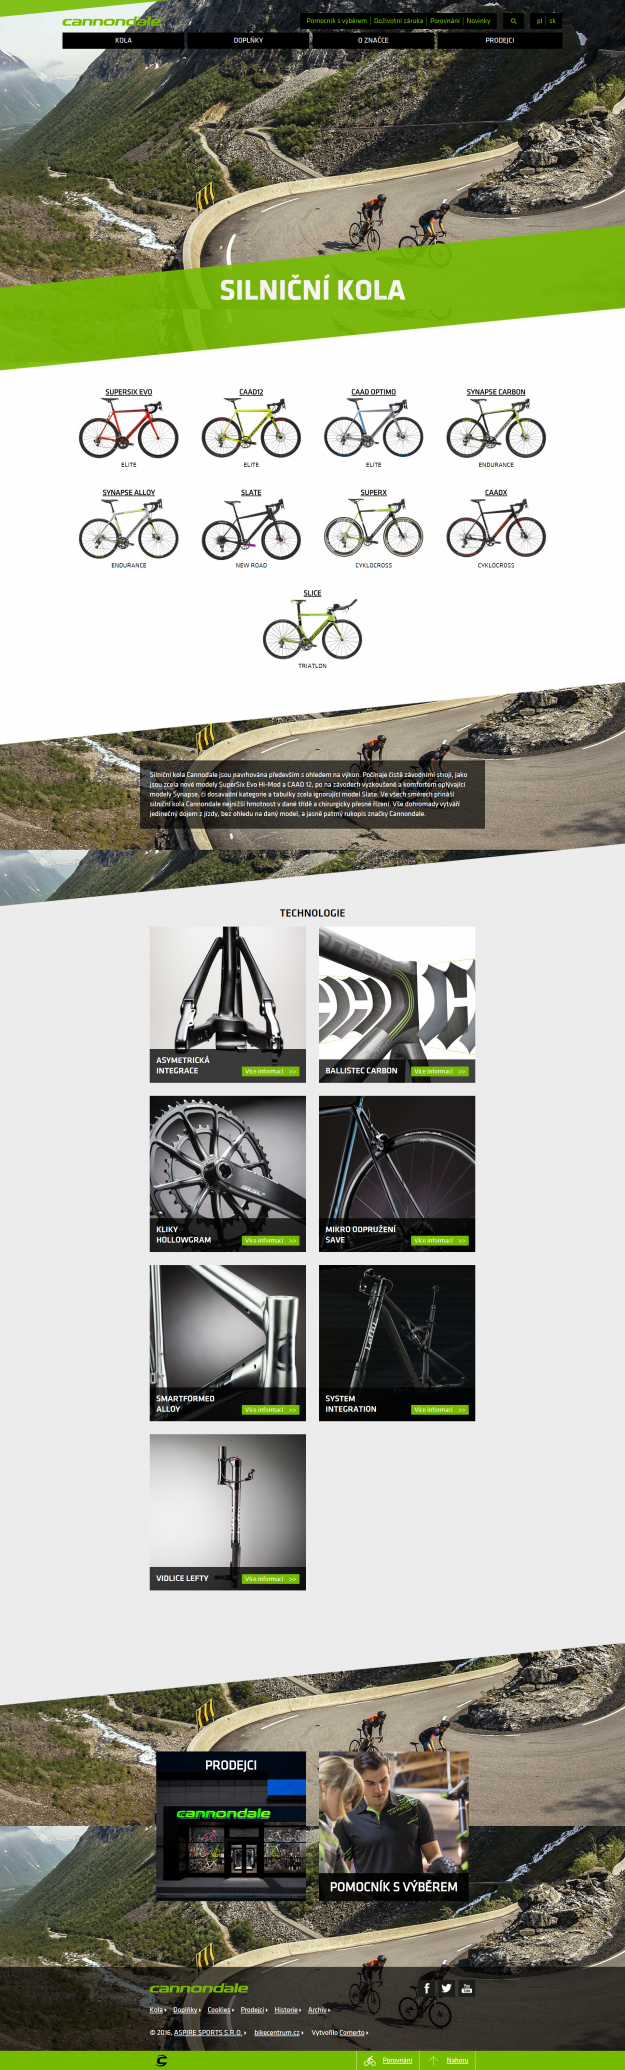 Redesign Cannondale Bikes - Screenshot